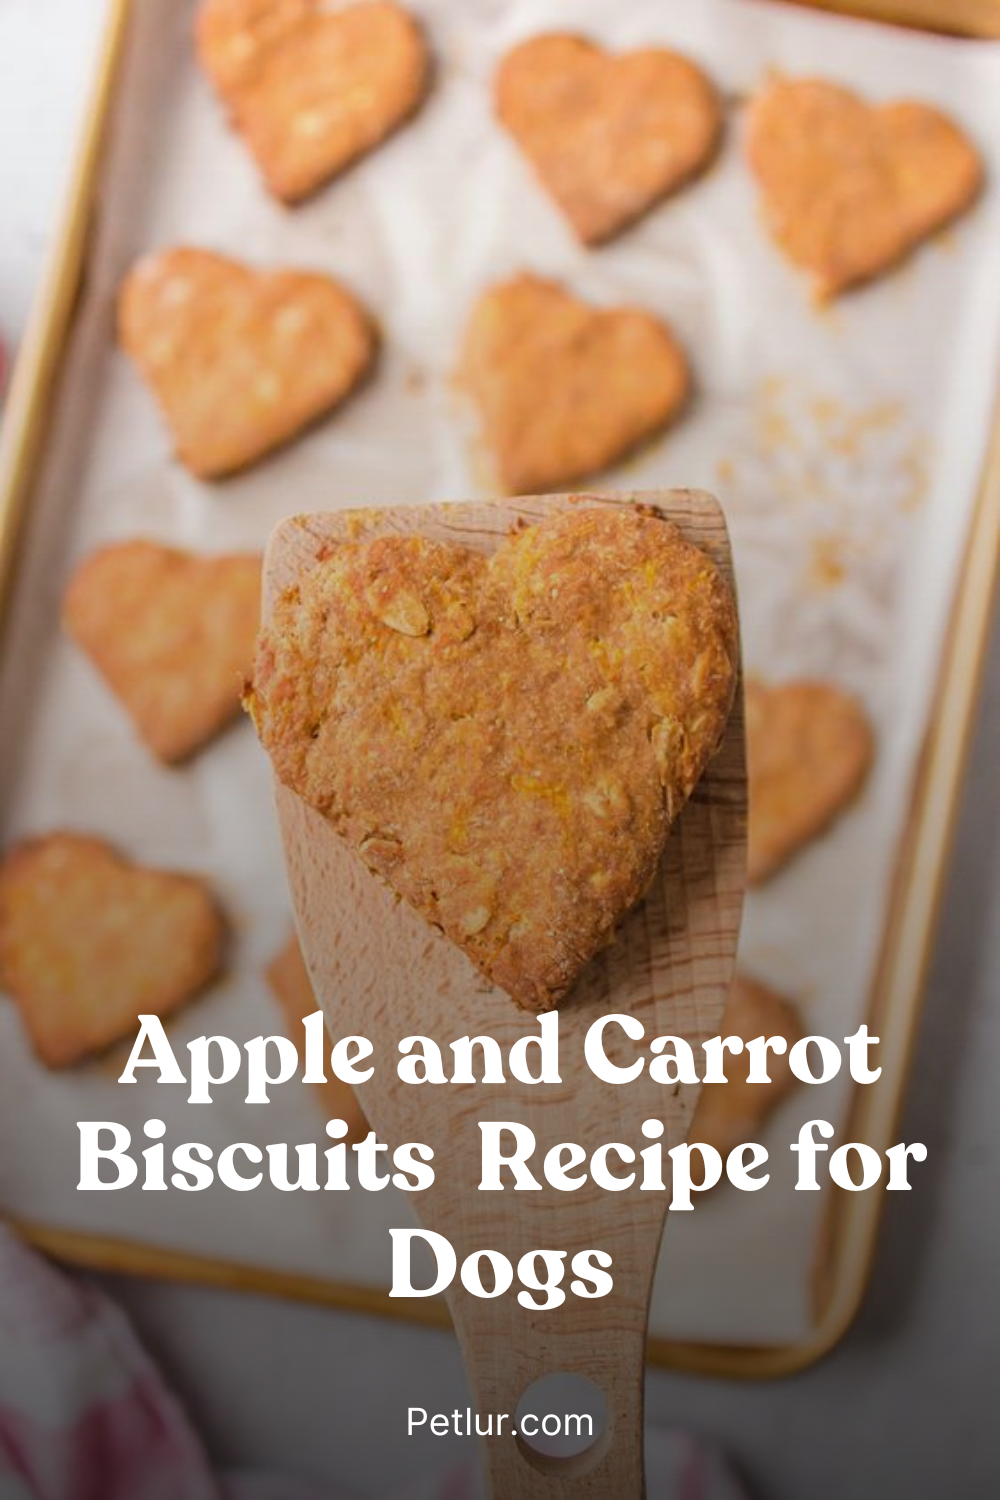 Apple and Carrot Biscuits